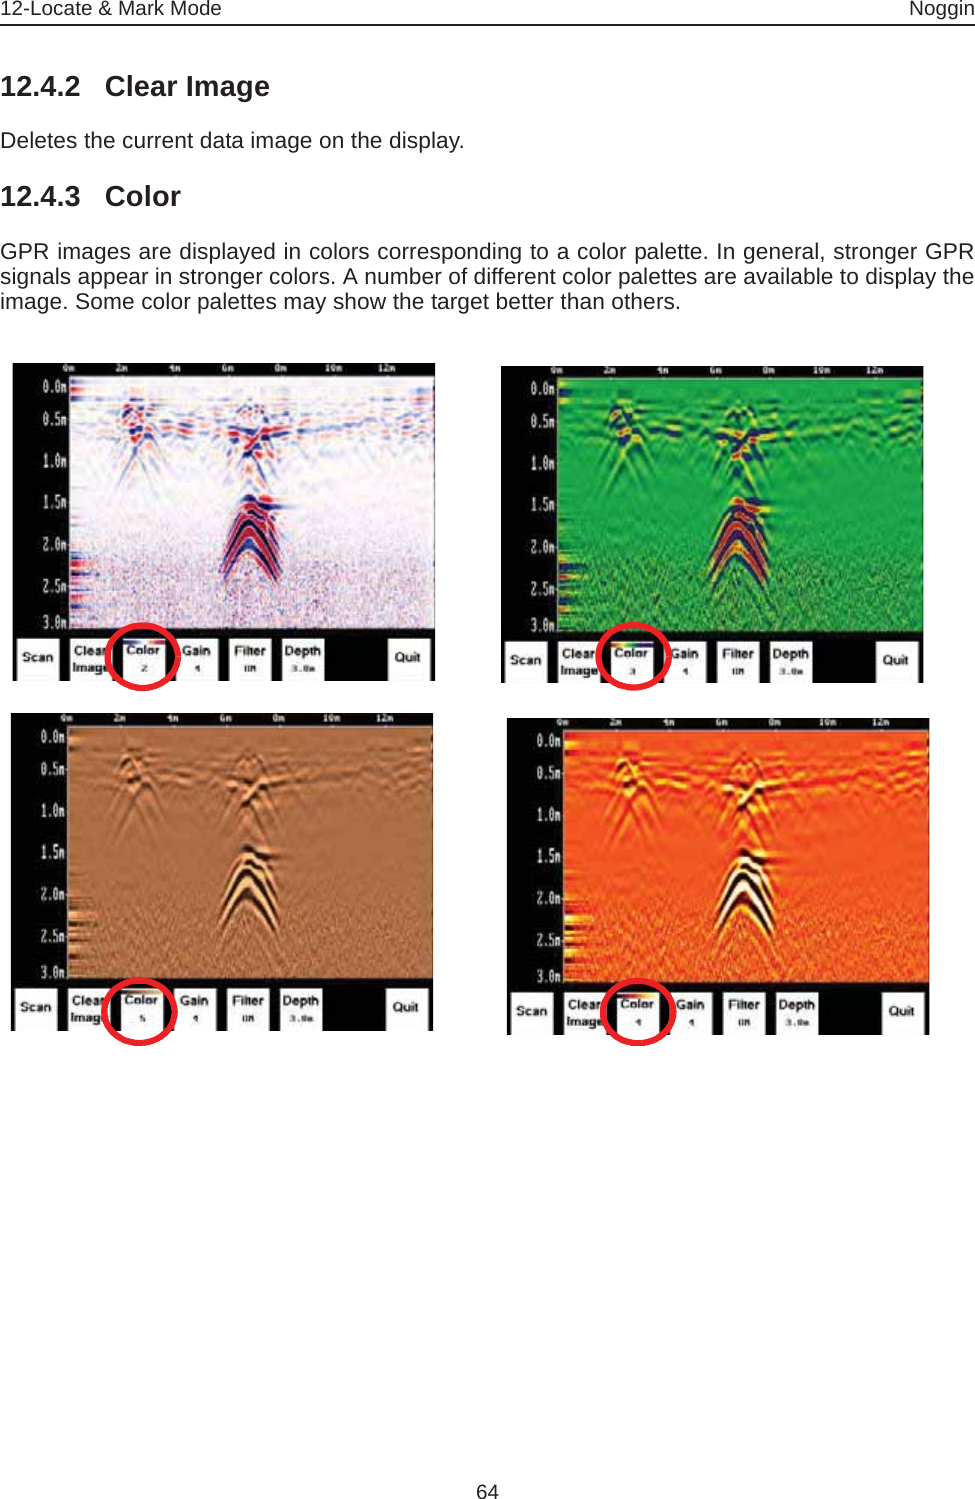 12-Locate &amp; Mark Mode Noggin6412.4.2 Clear ImageDeletes the current data image on the display.12.4.3 ColorGPR images are displayed in colors corresponding to a color palette. In general, stronger GPRsignals appear in stronger colors. A number of different color palettes are available to display theimage. Some color palettes may show the target better than others.